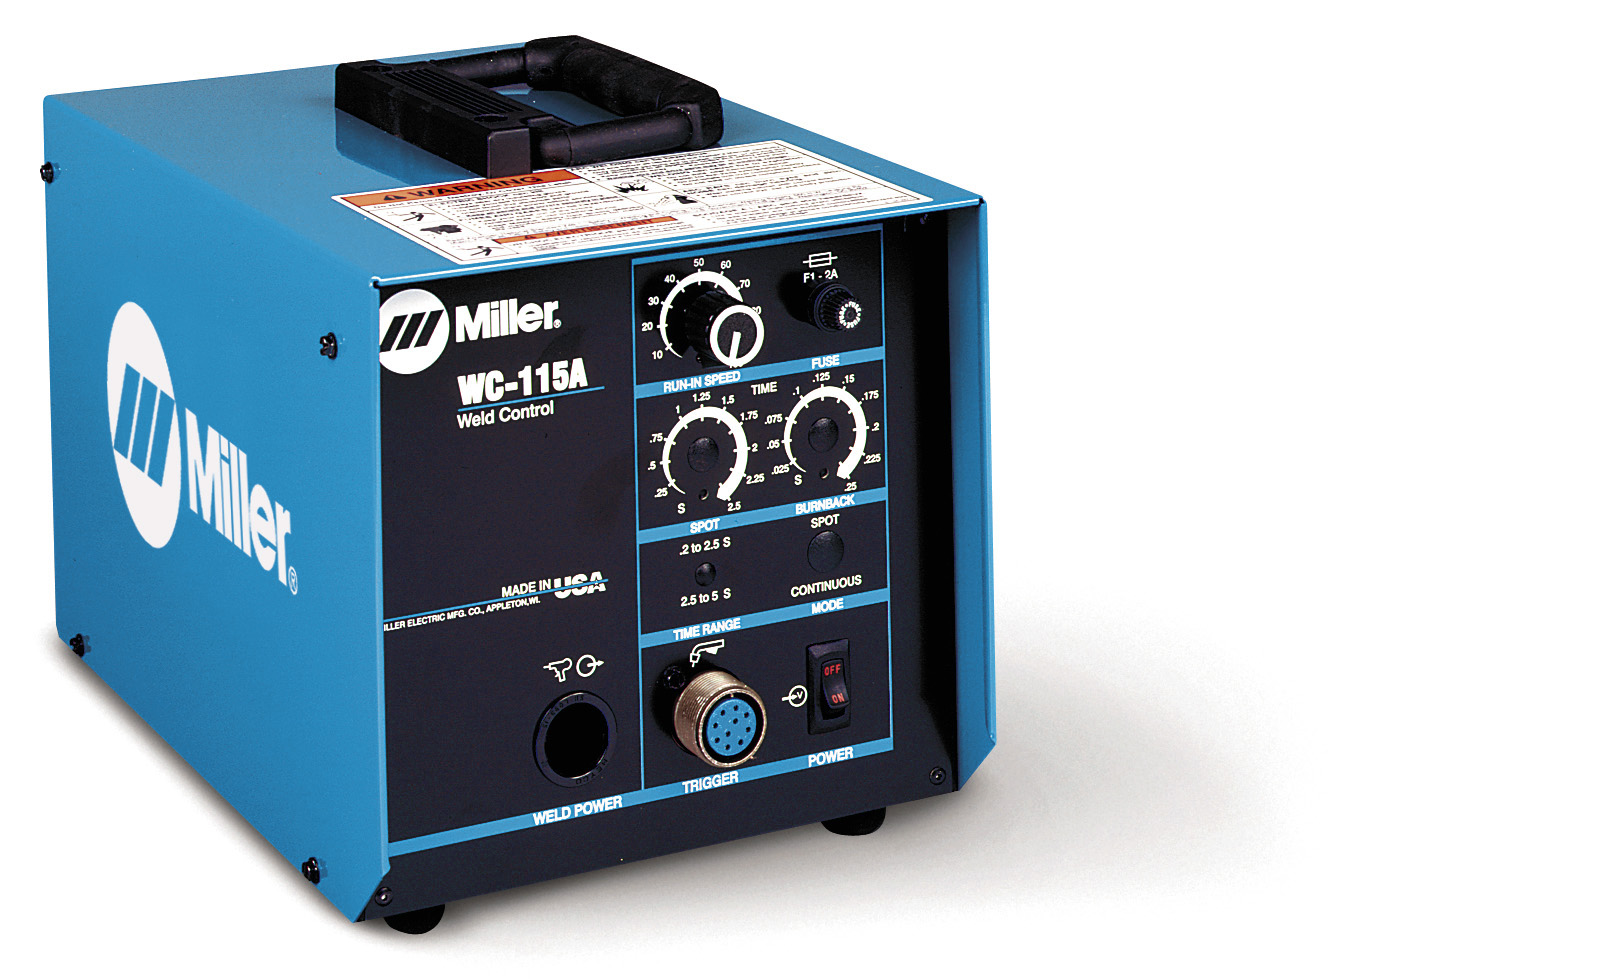 WC-115A Weld Control without Contactor | MillerWelds